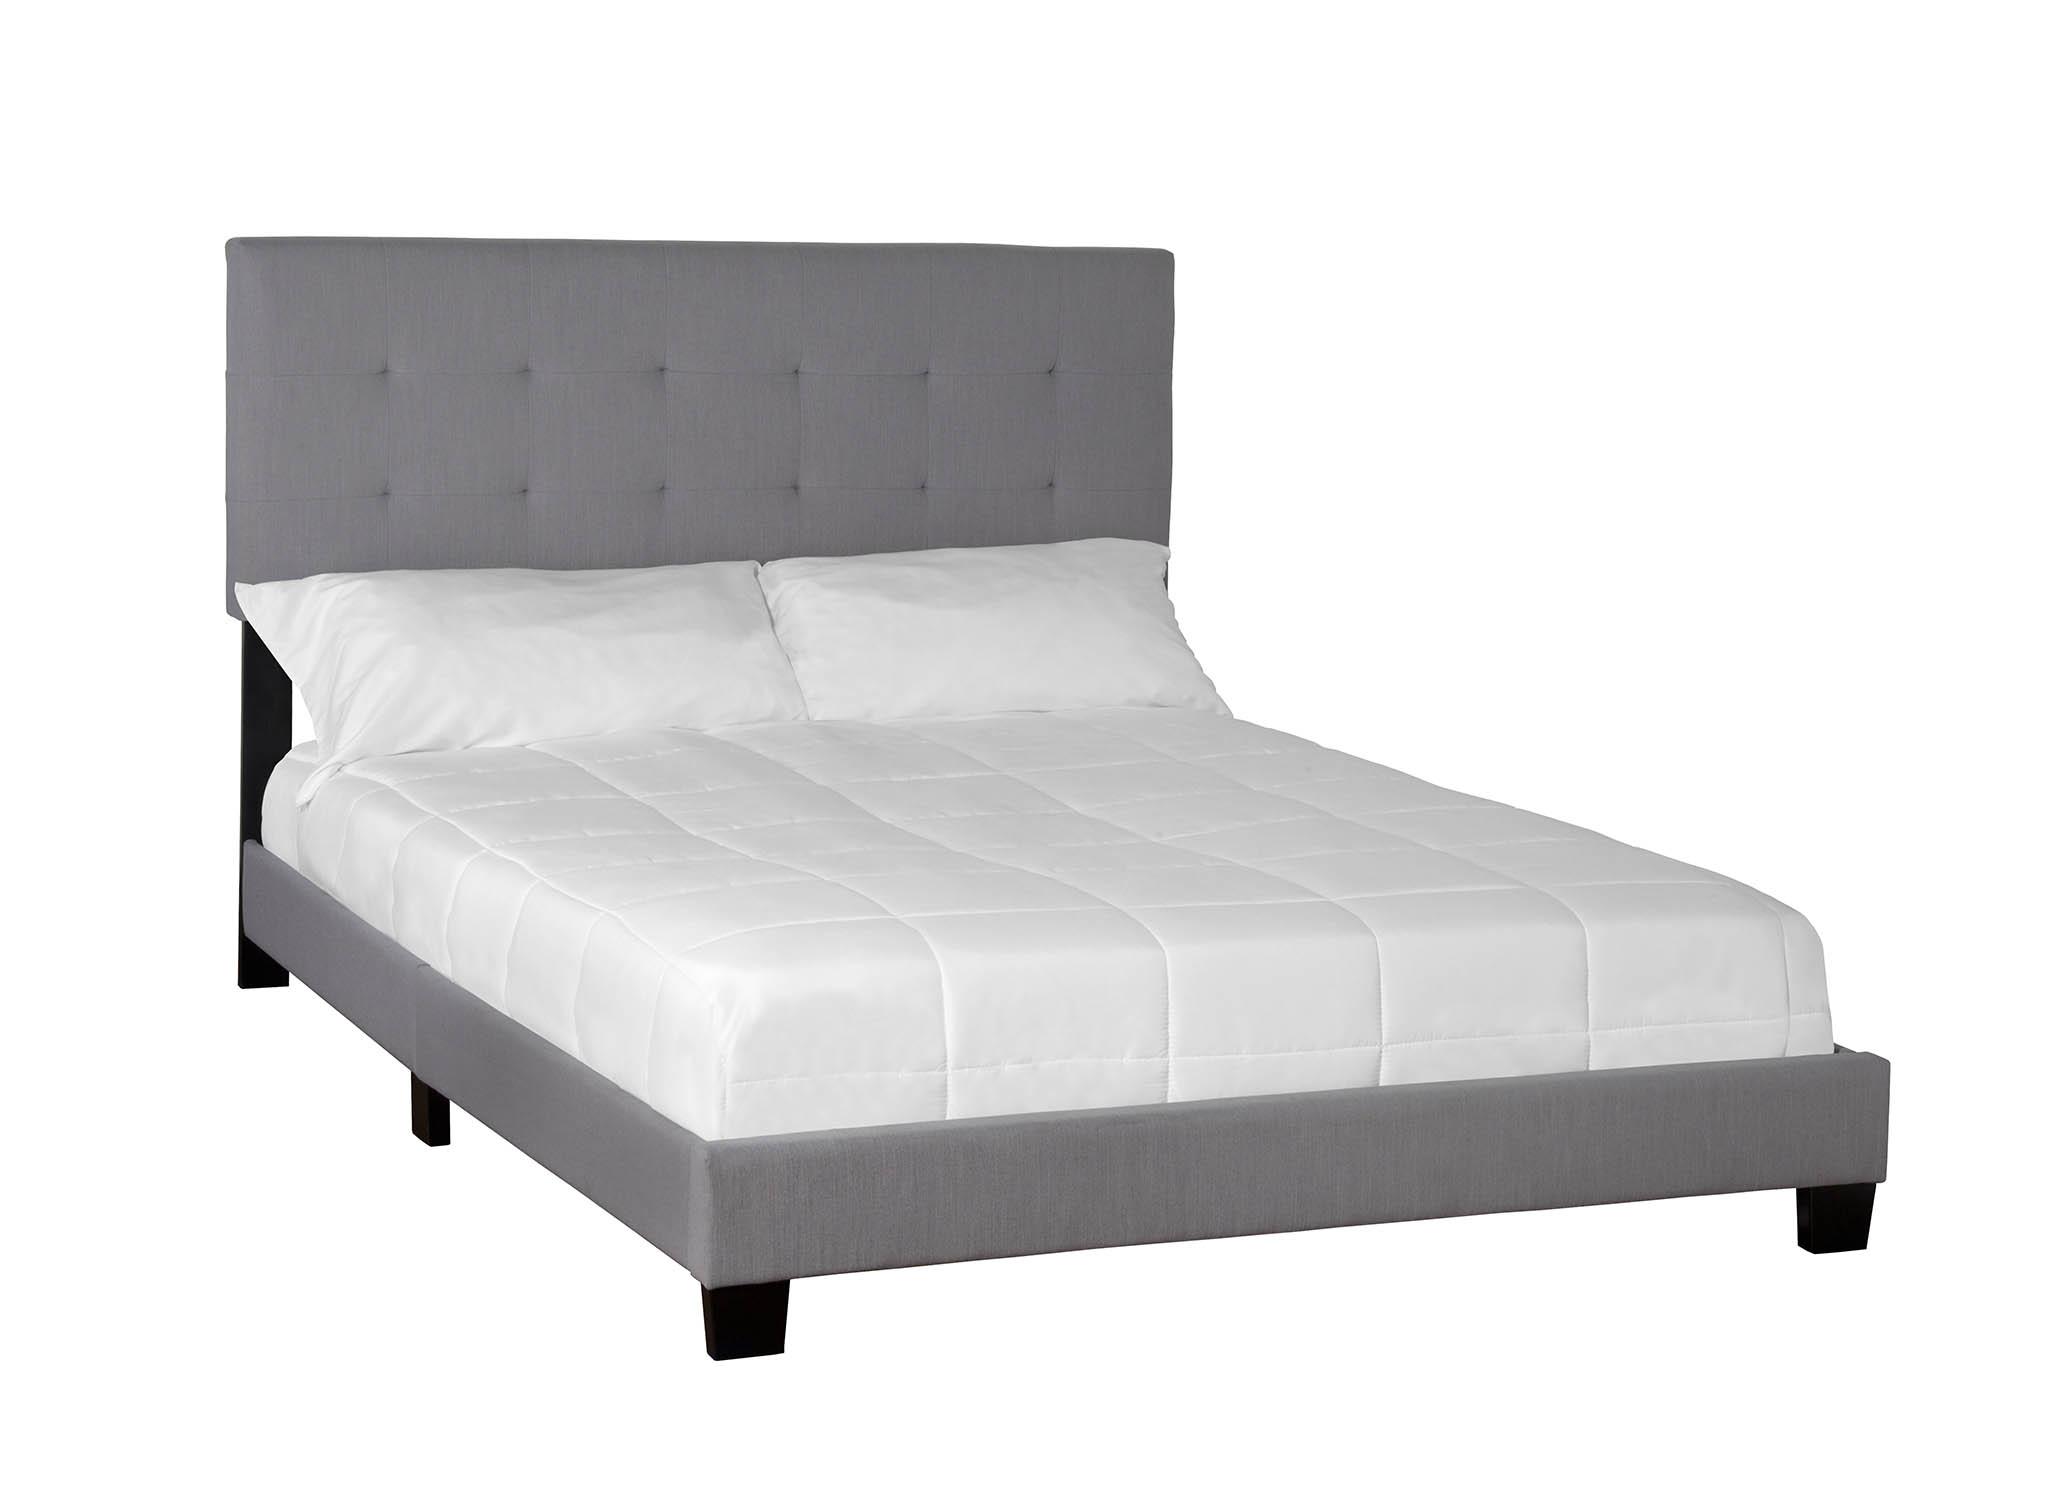 Modern, Transitional Panel Bed EDEN 1600-103 1600-103 in Gray Fabric